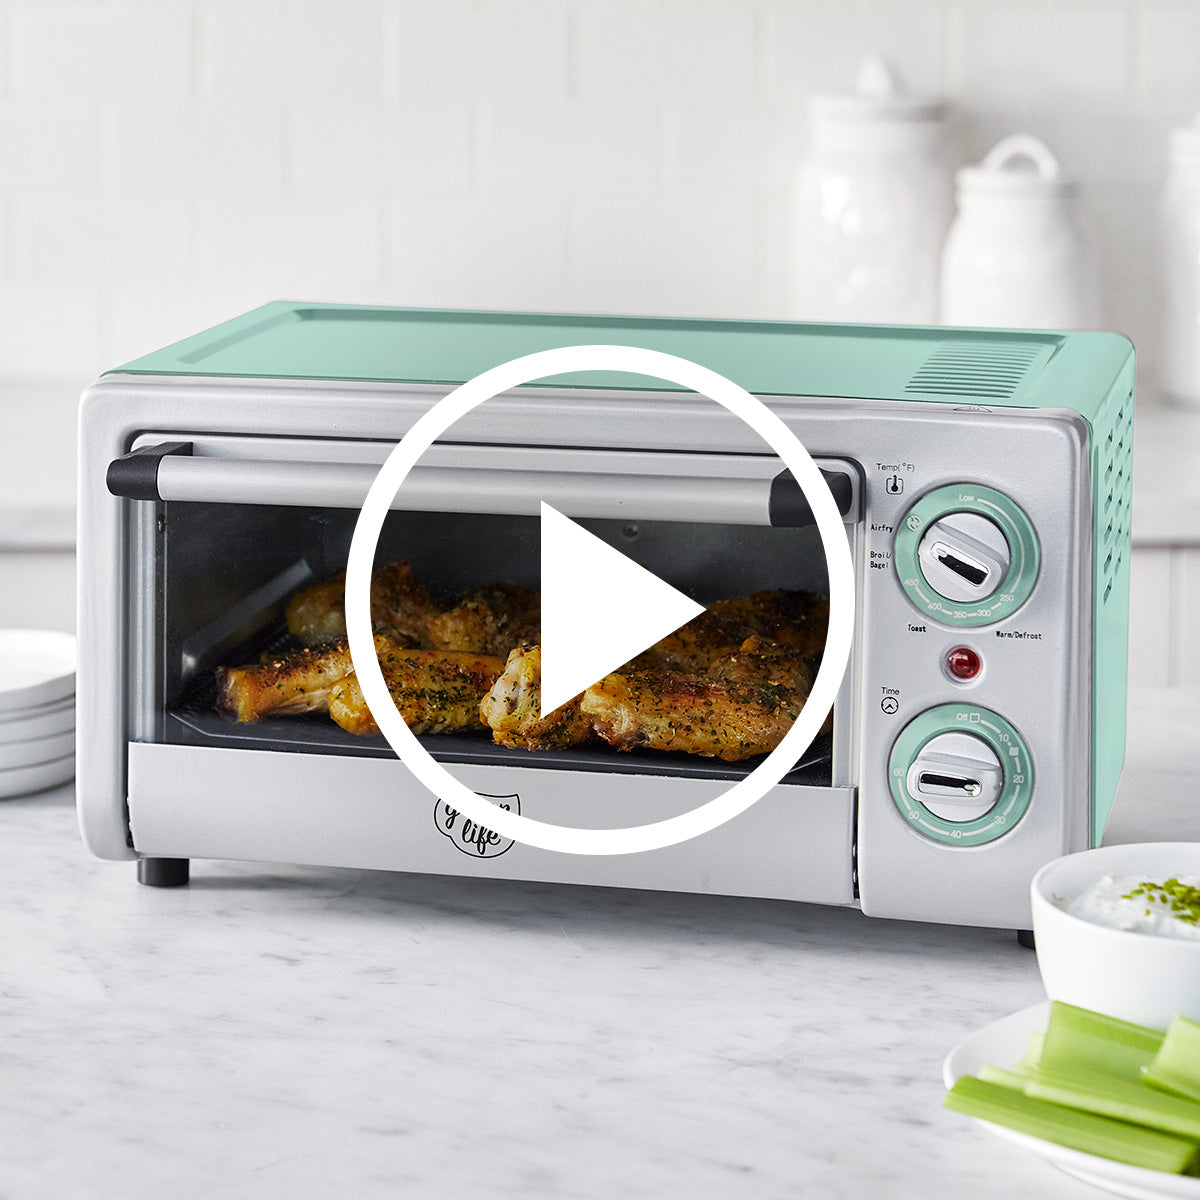  Convection Toaster Oven, Mini Oven,Convection Countertop  Toaster Oven Electric Toaster Oven Toaster Ovens Countertop Happy Life  Toaster Oven Air Fryer,: Home & Kitchen